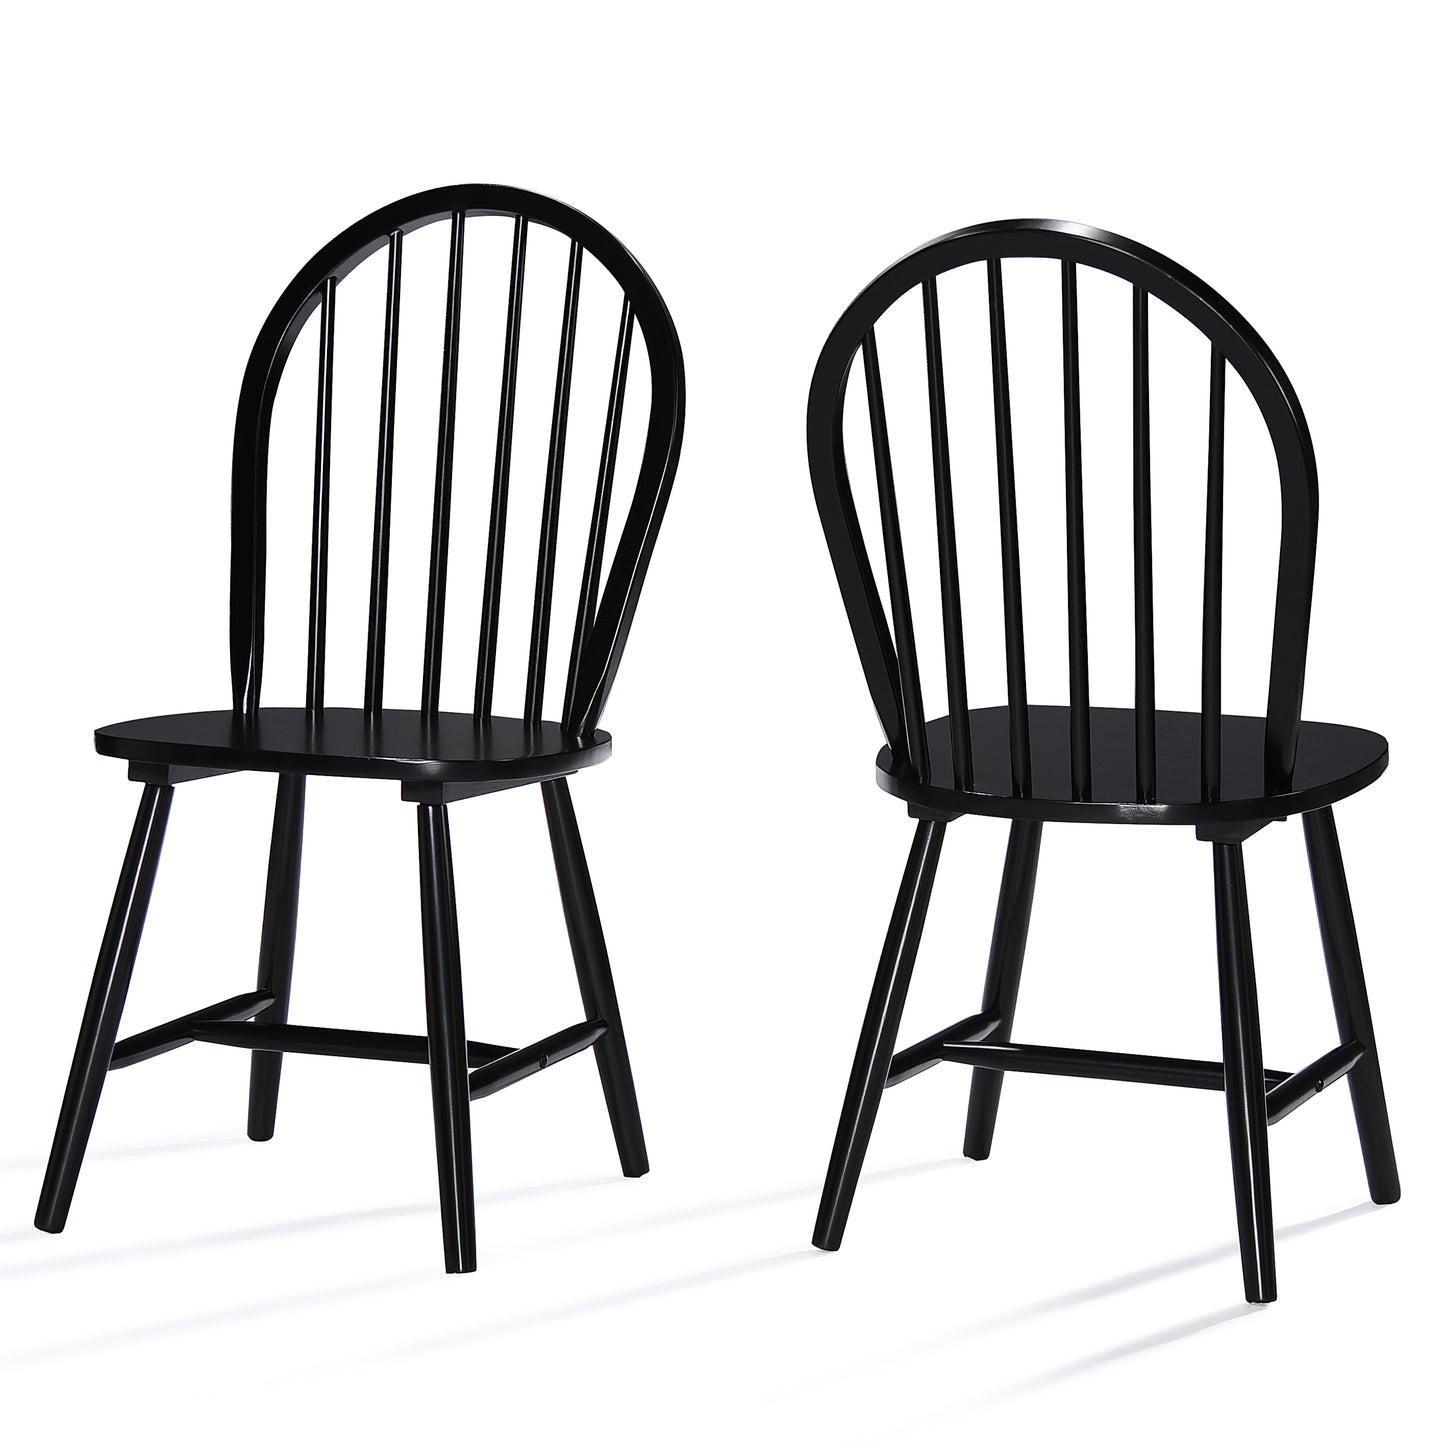 Crosby Farmhouse Cottage High Back Spindled Rubberwood Dining Chairs (Set of 2)